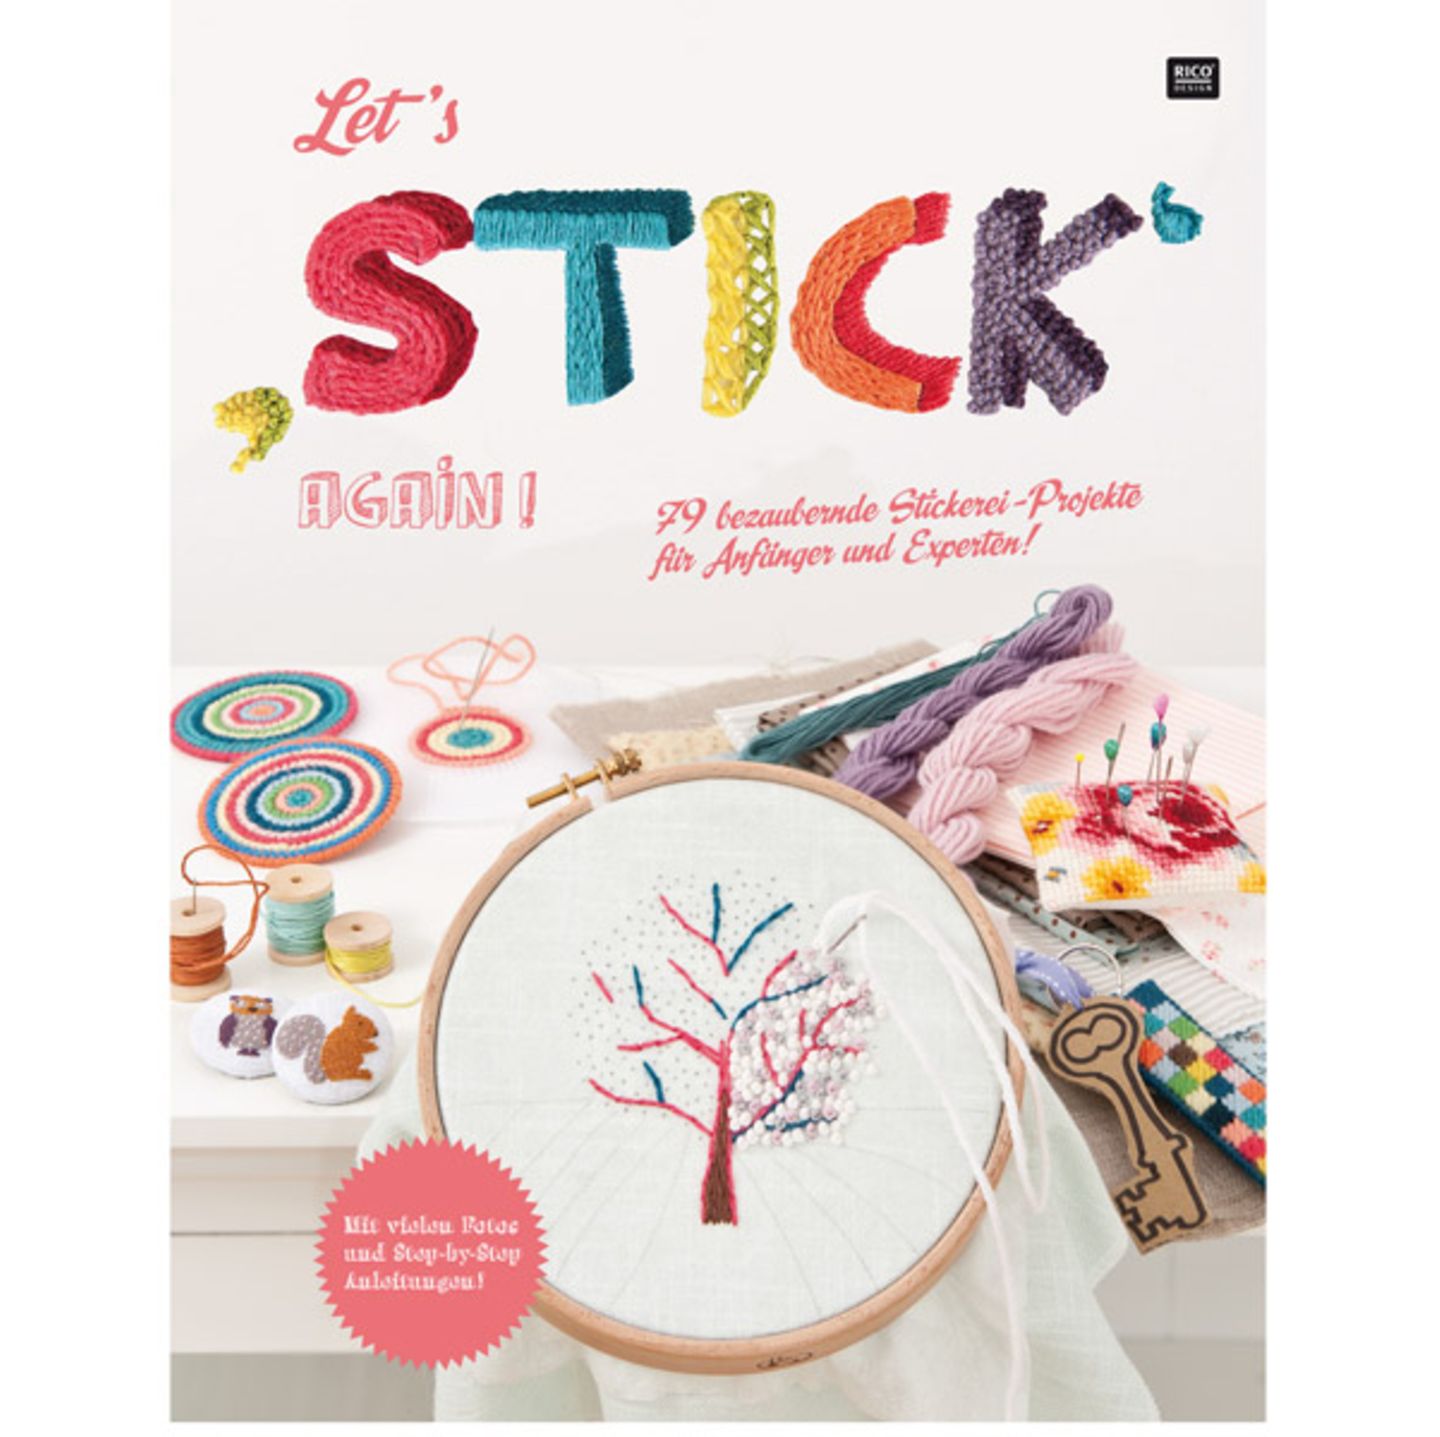 Buch "Let's stick again"